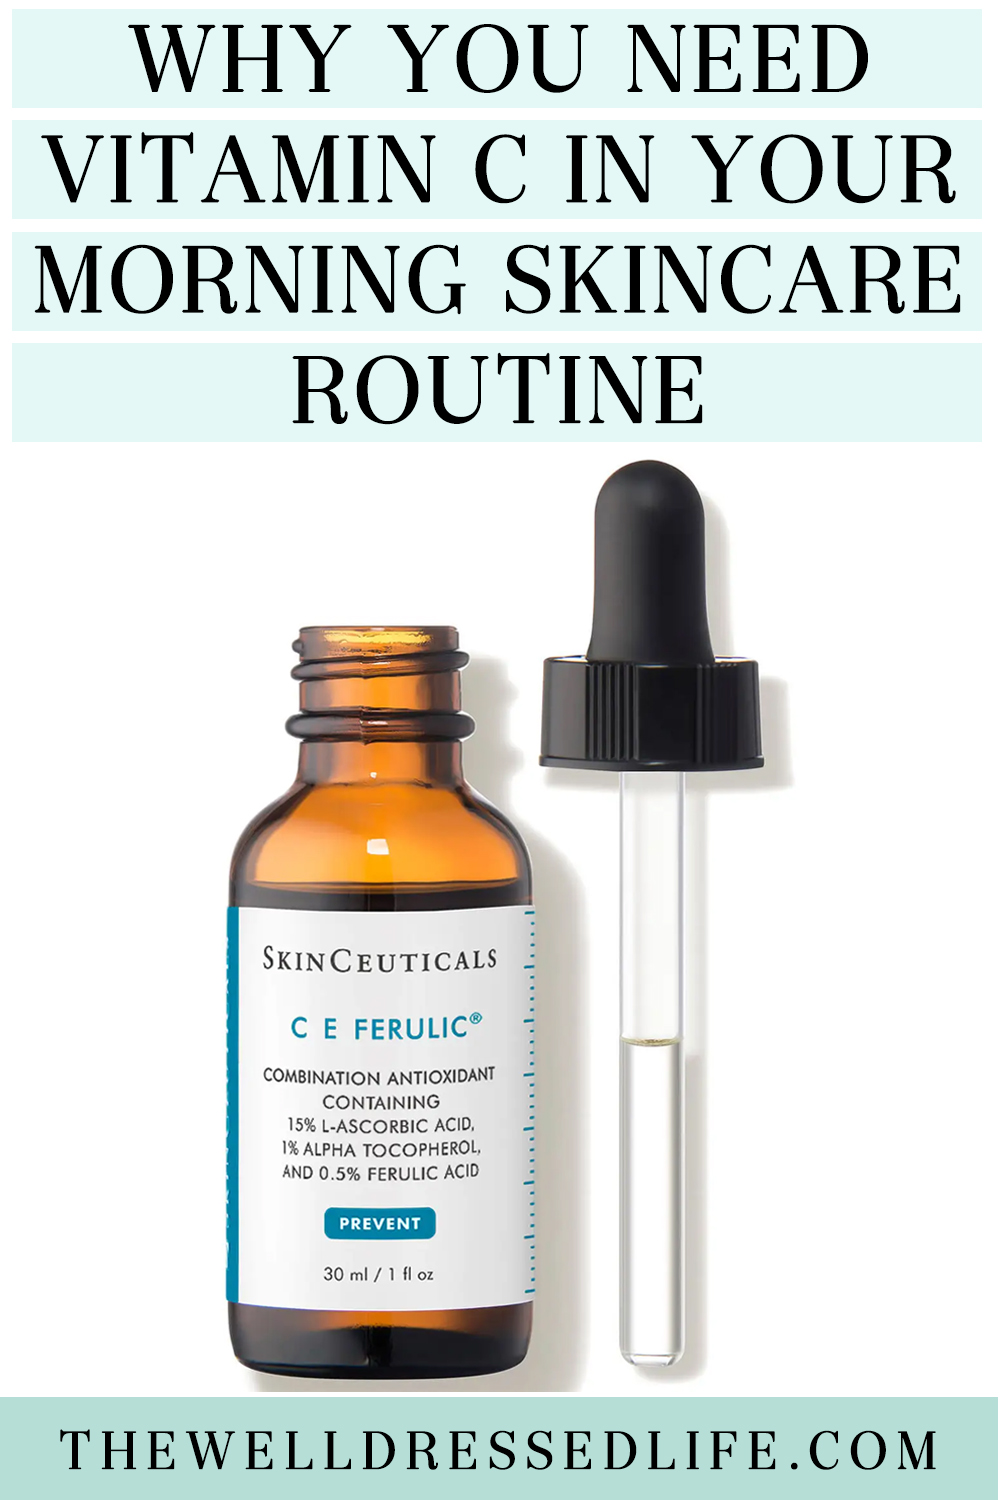 Why You Need Vitamin C in Your Morning Skincare Routine